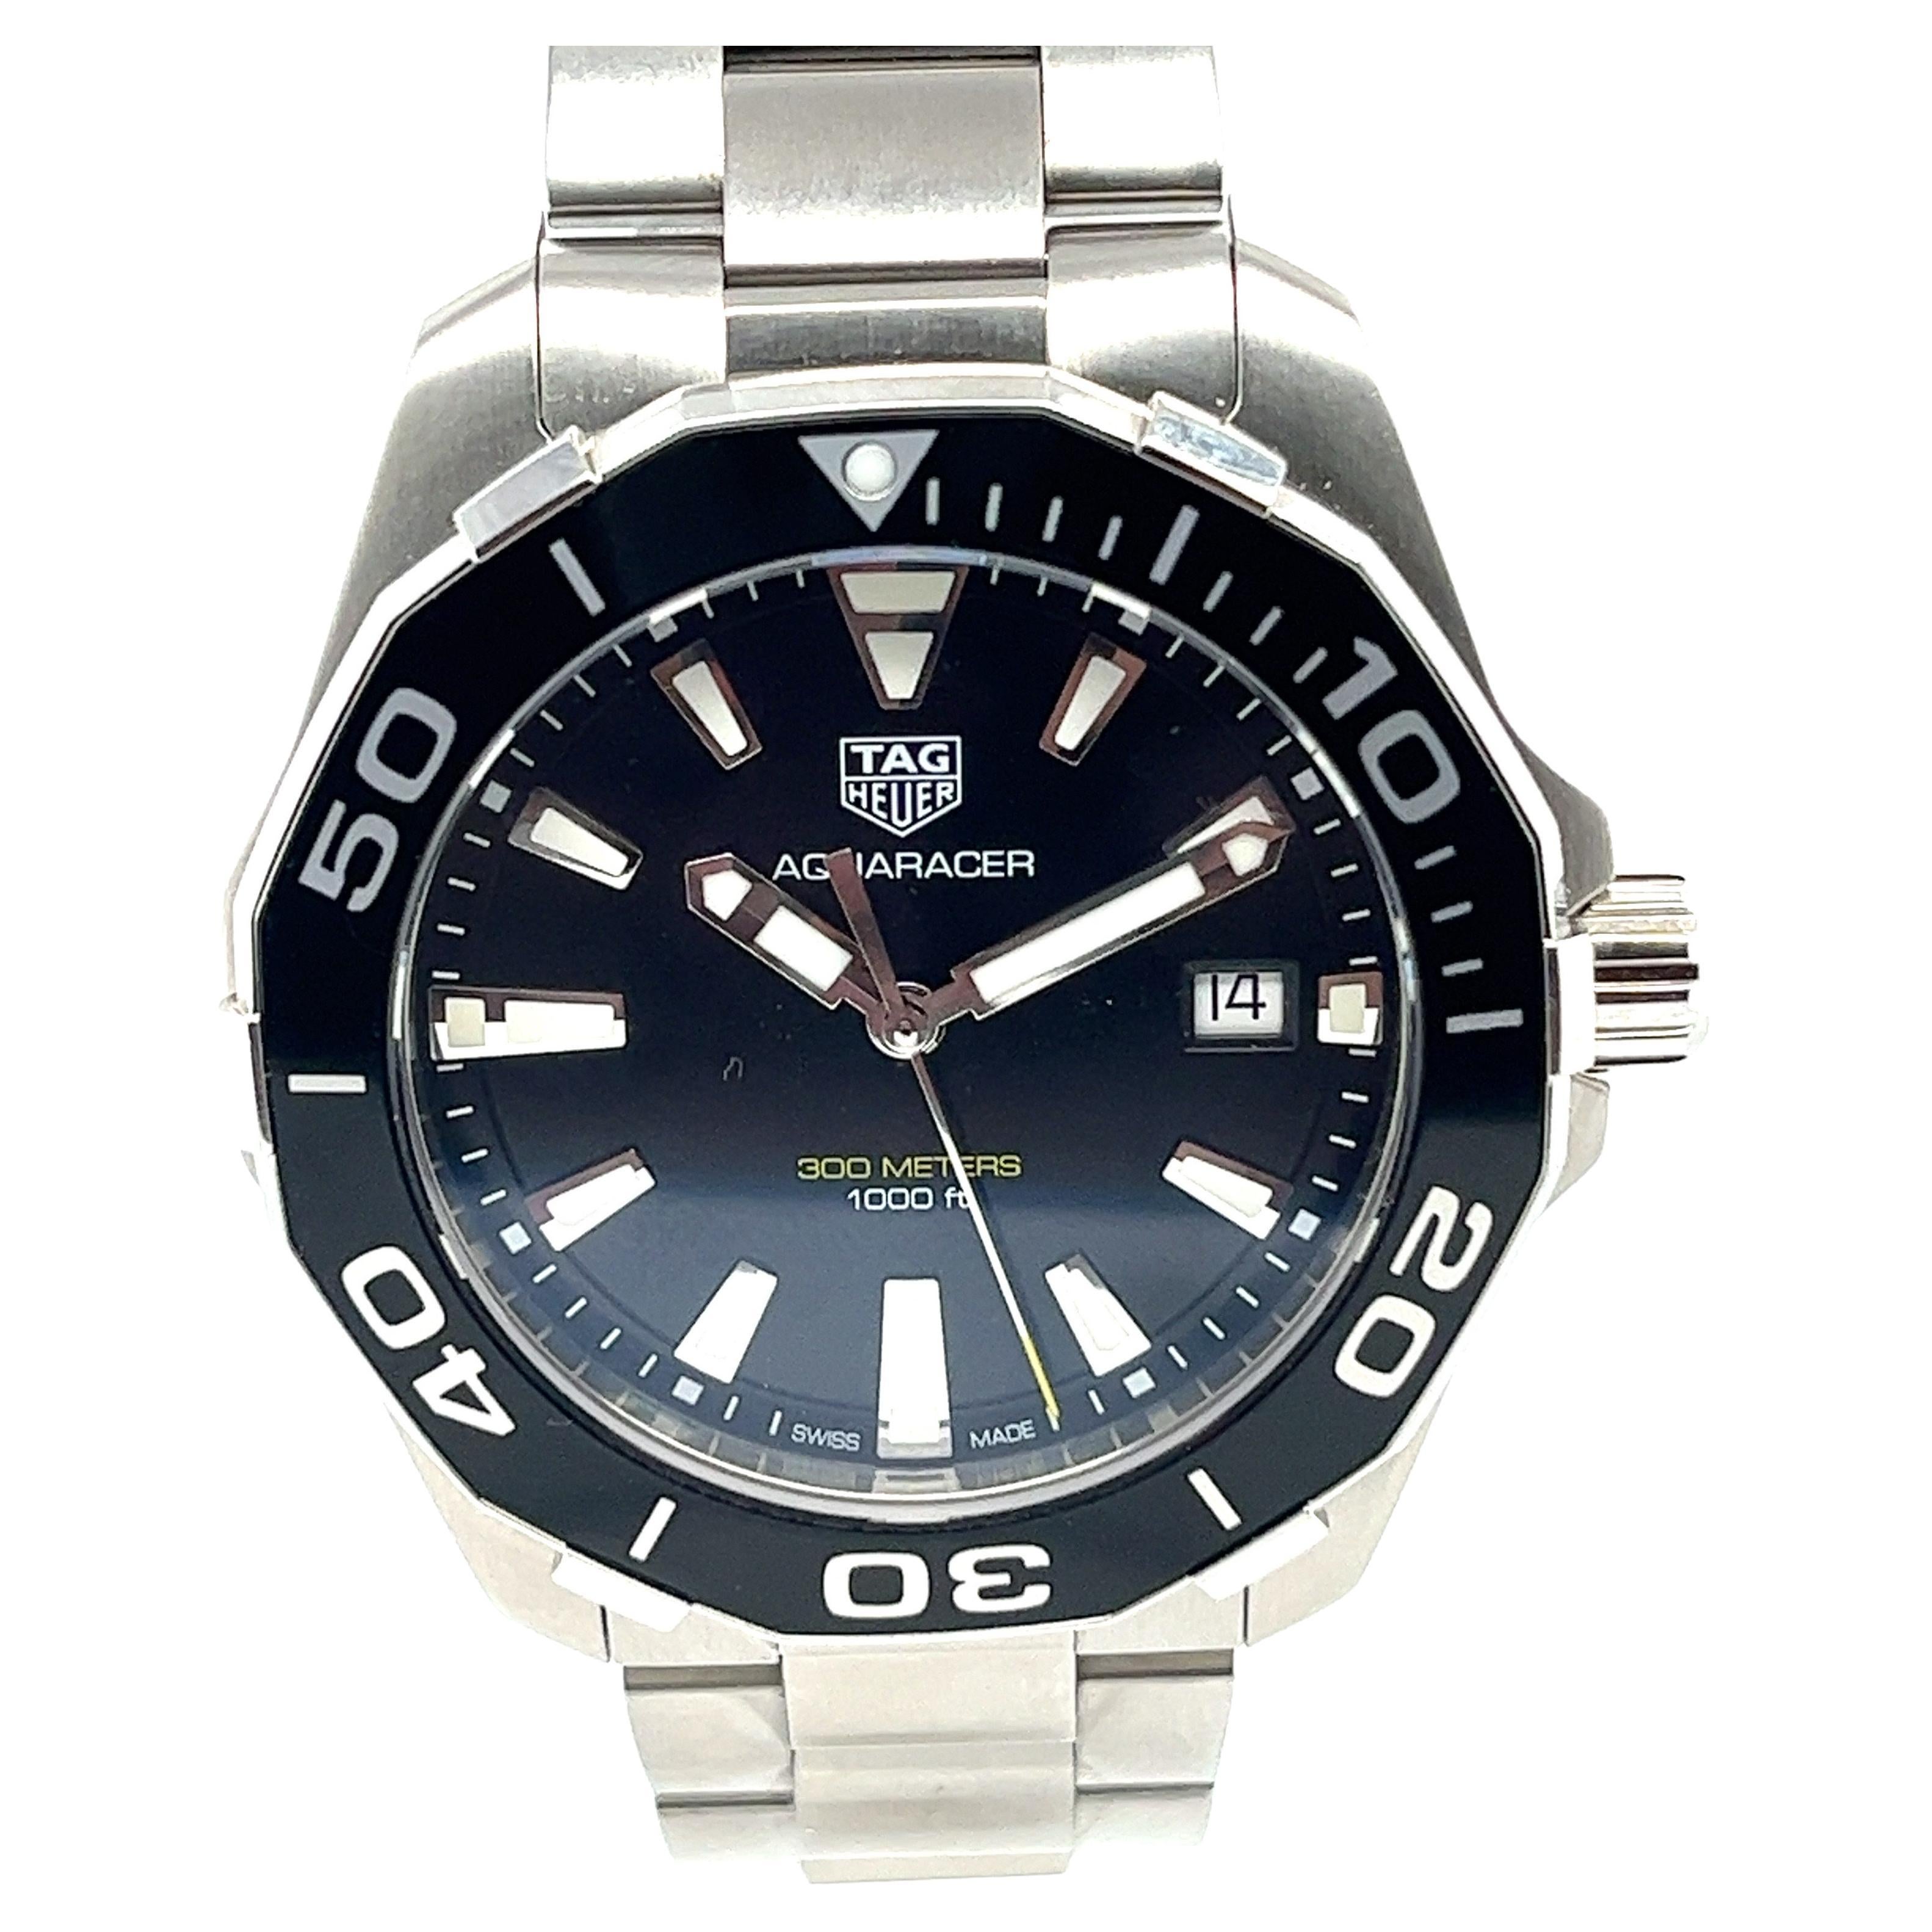 This beautiful Tag Heuer Aquaracer is in pristine condition. A quartz men's watch that features a black dial, black aluminium bezel and a polished stainless steel case. Good for up to 300 metres or 1000 feet underwater it is designed for the depths.